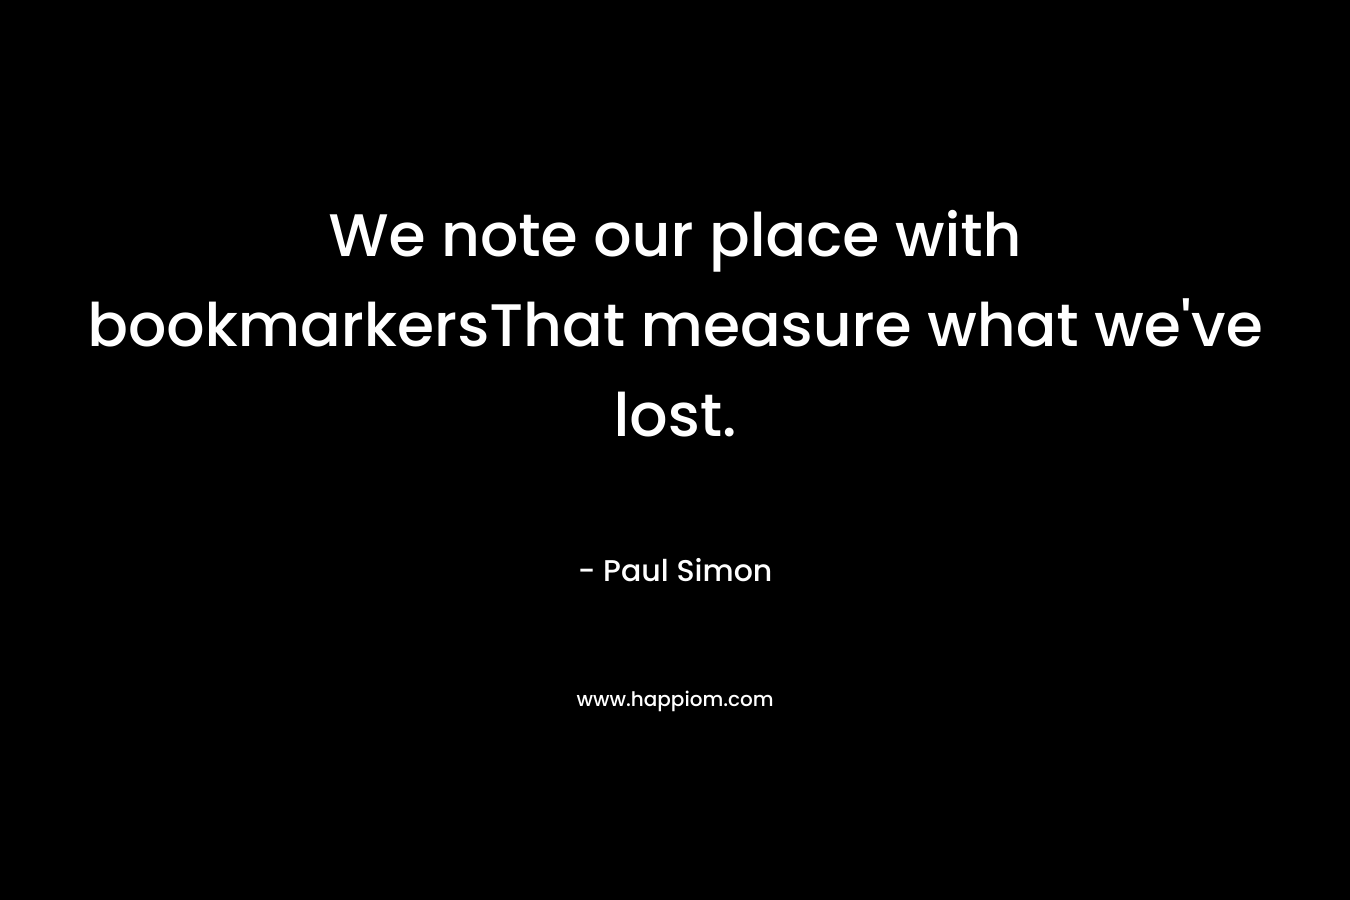 We note our place with bookmarkersThat measure what we’ve lost. – Paul Simon